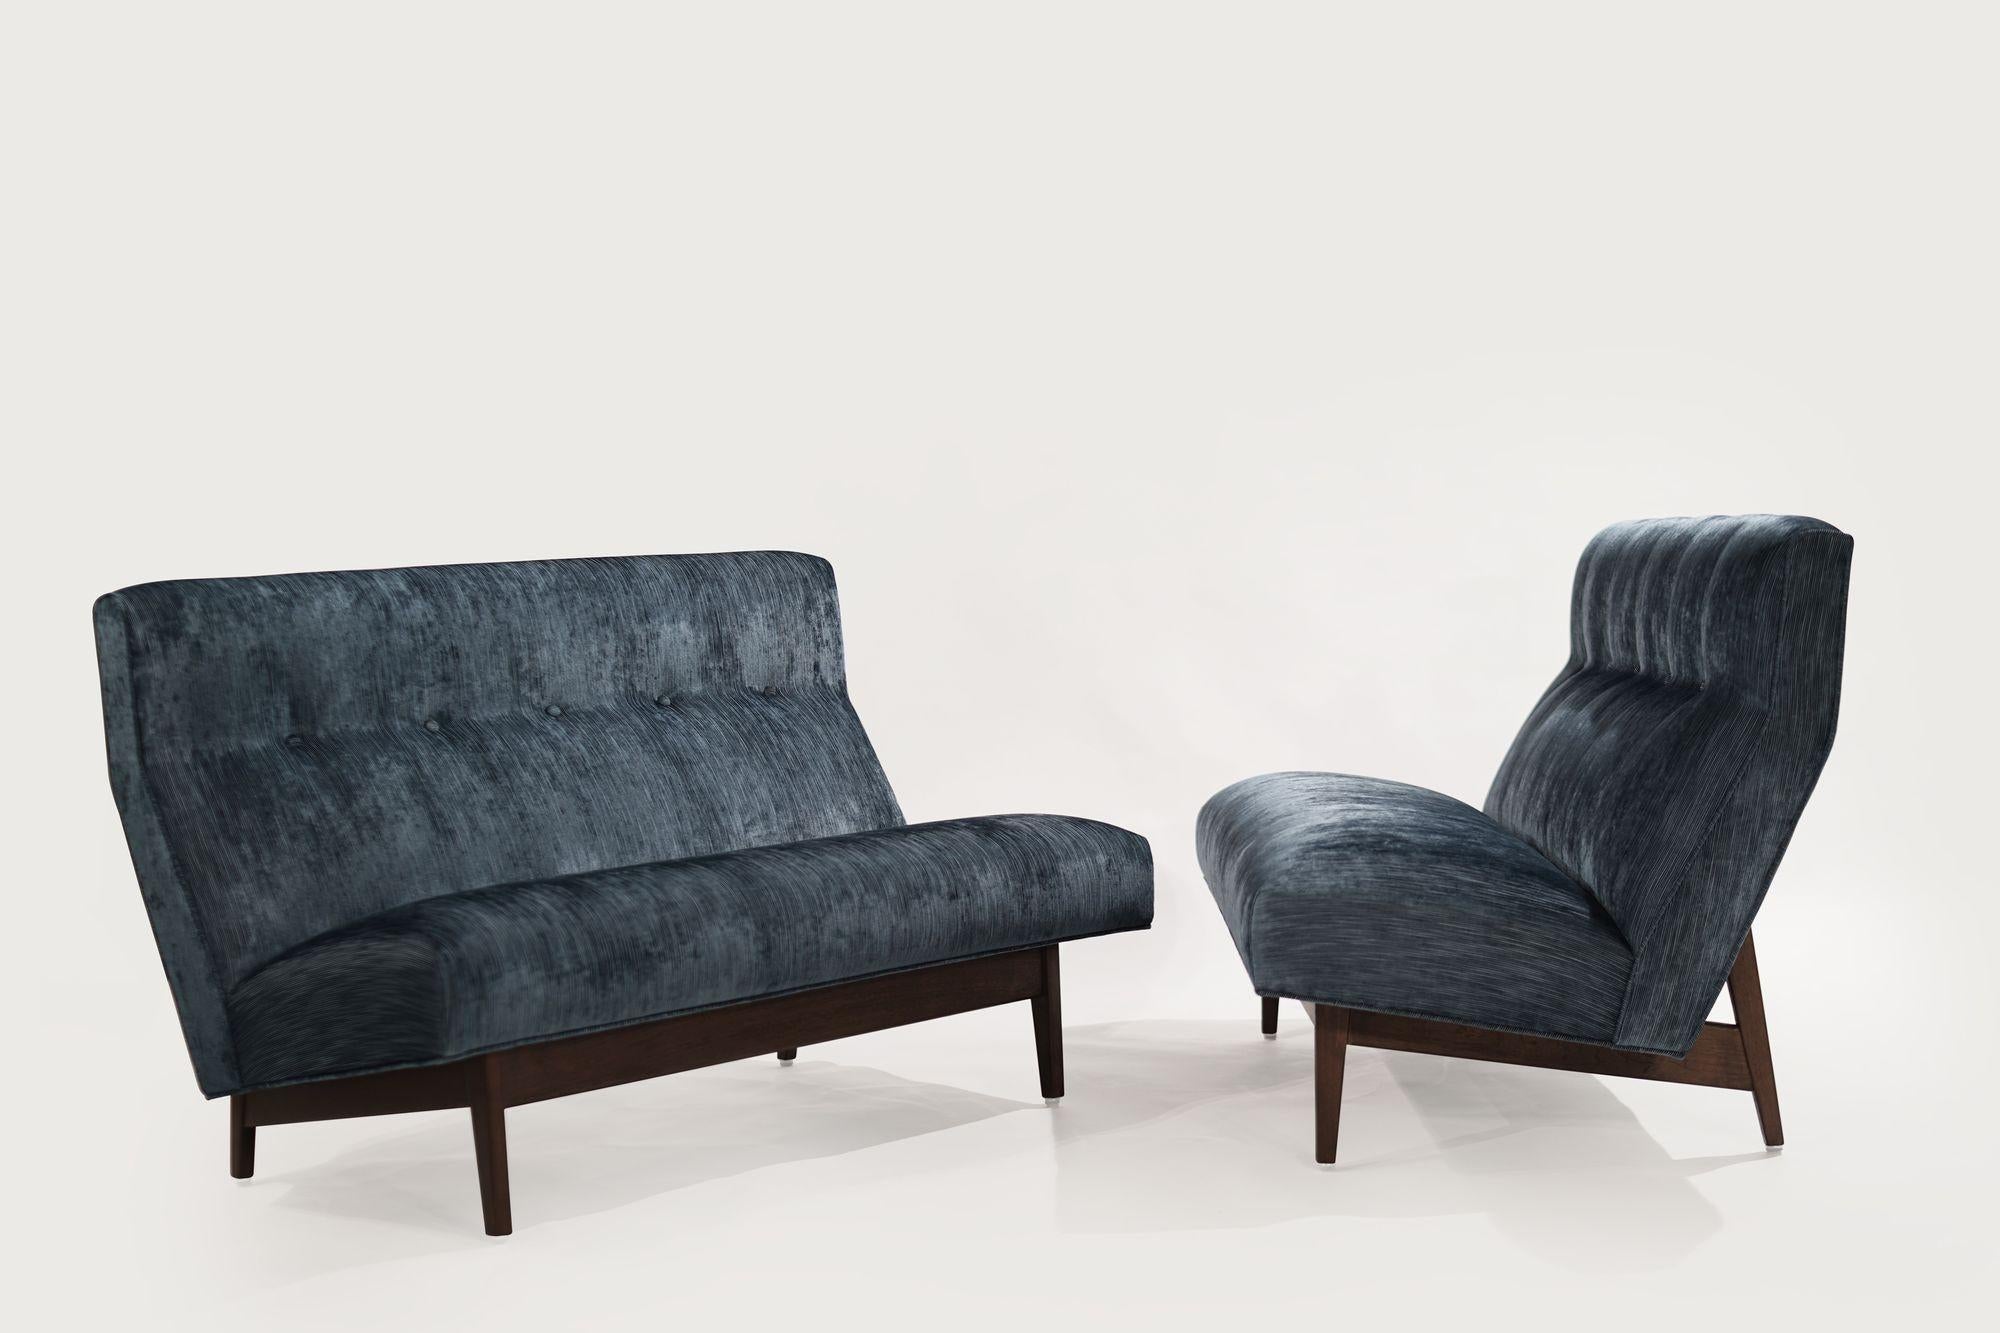 A set of loveseats designed by The Iconic Danish Designer Jens Risom. Restored the way only Stamford Modern does it, fitted with new hand cut, high-grade foam, updated spring system and reupholstered in an embossed velvet with different tones of